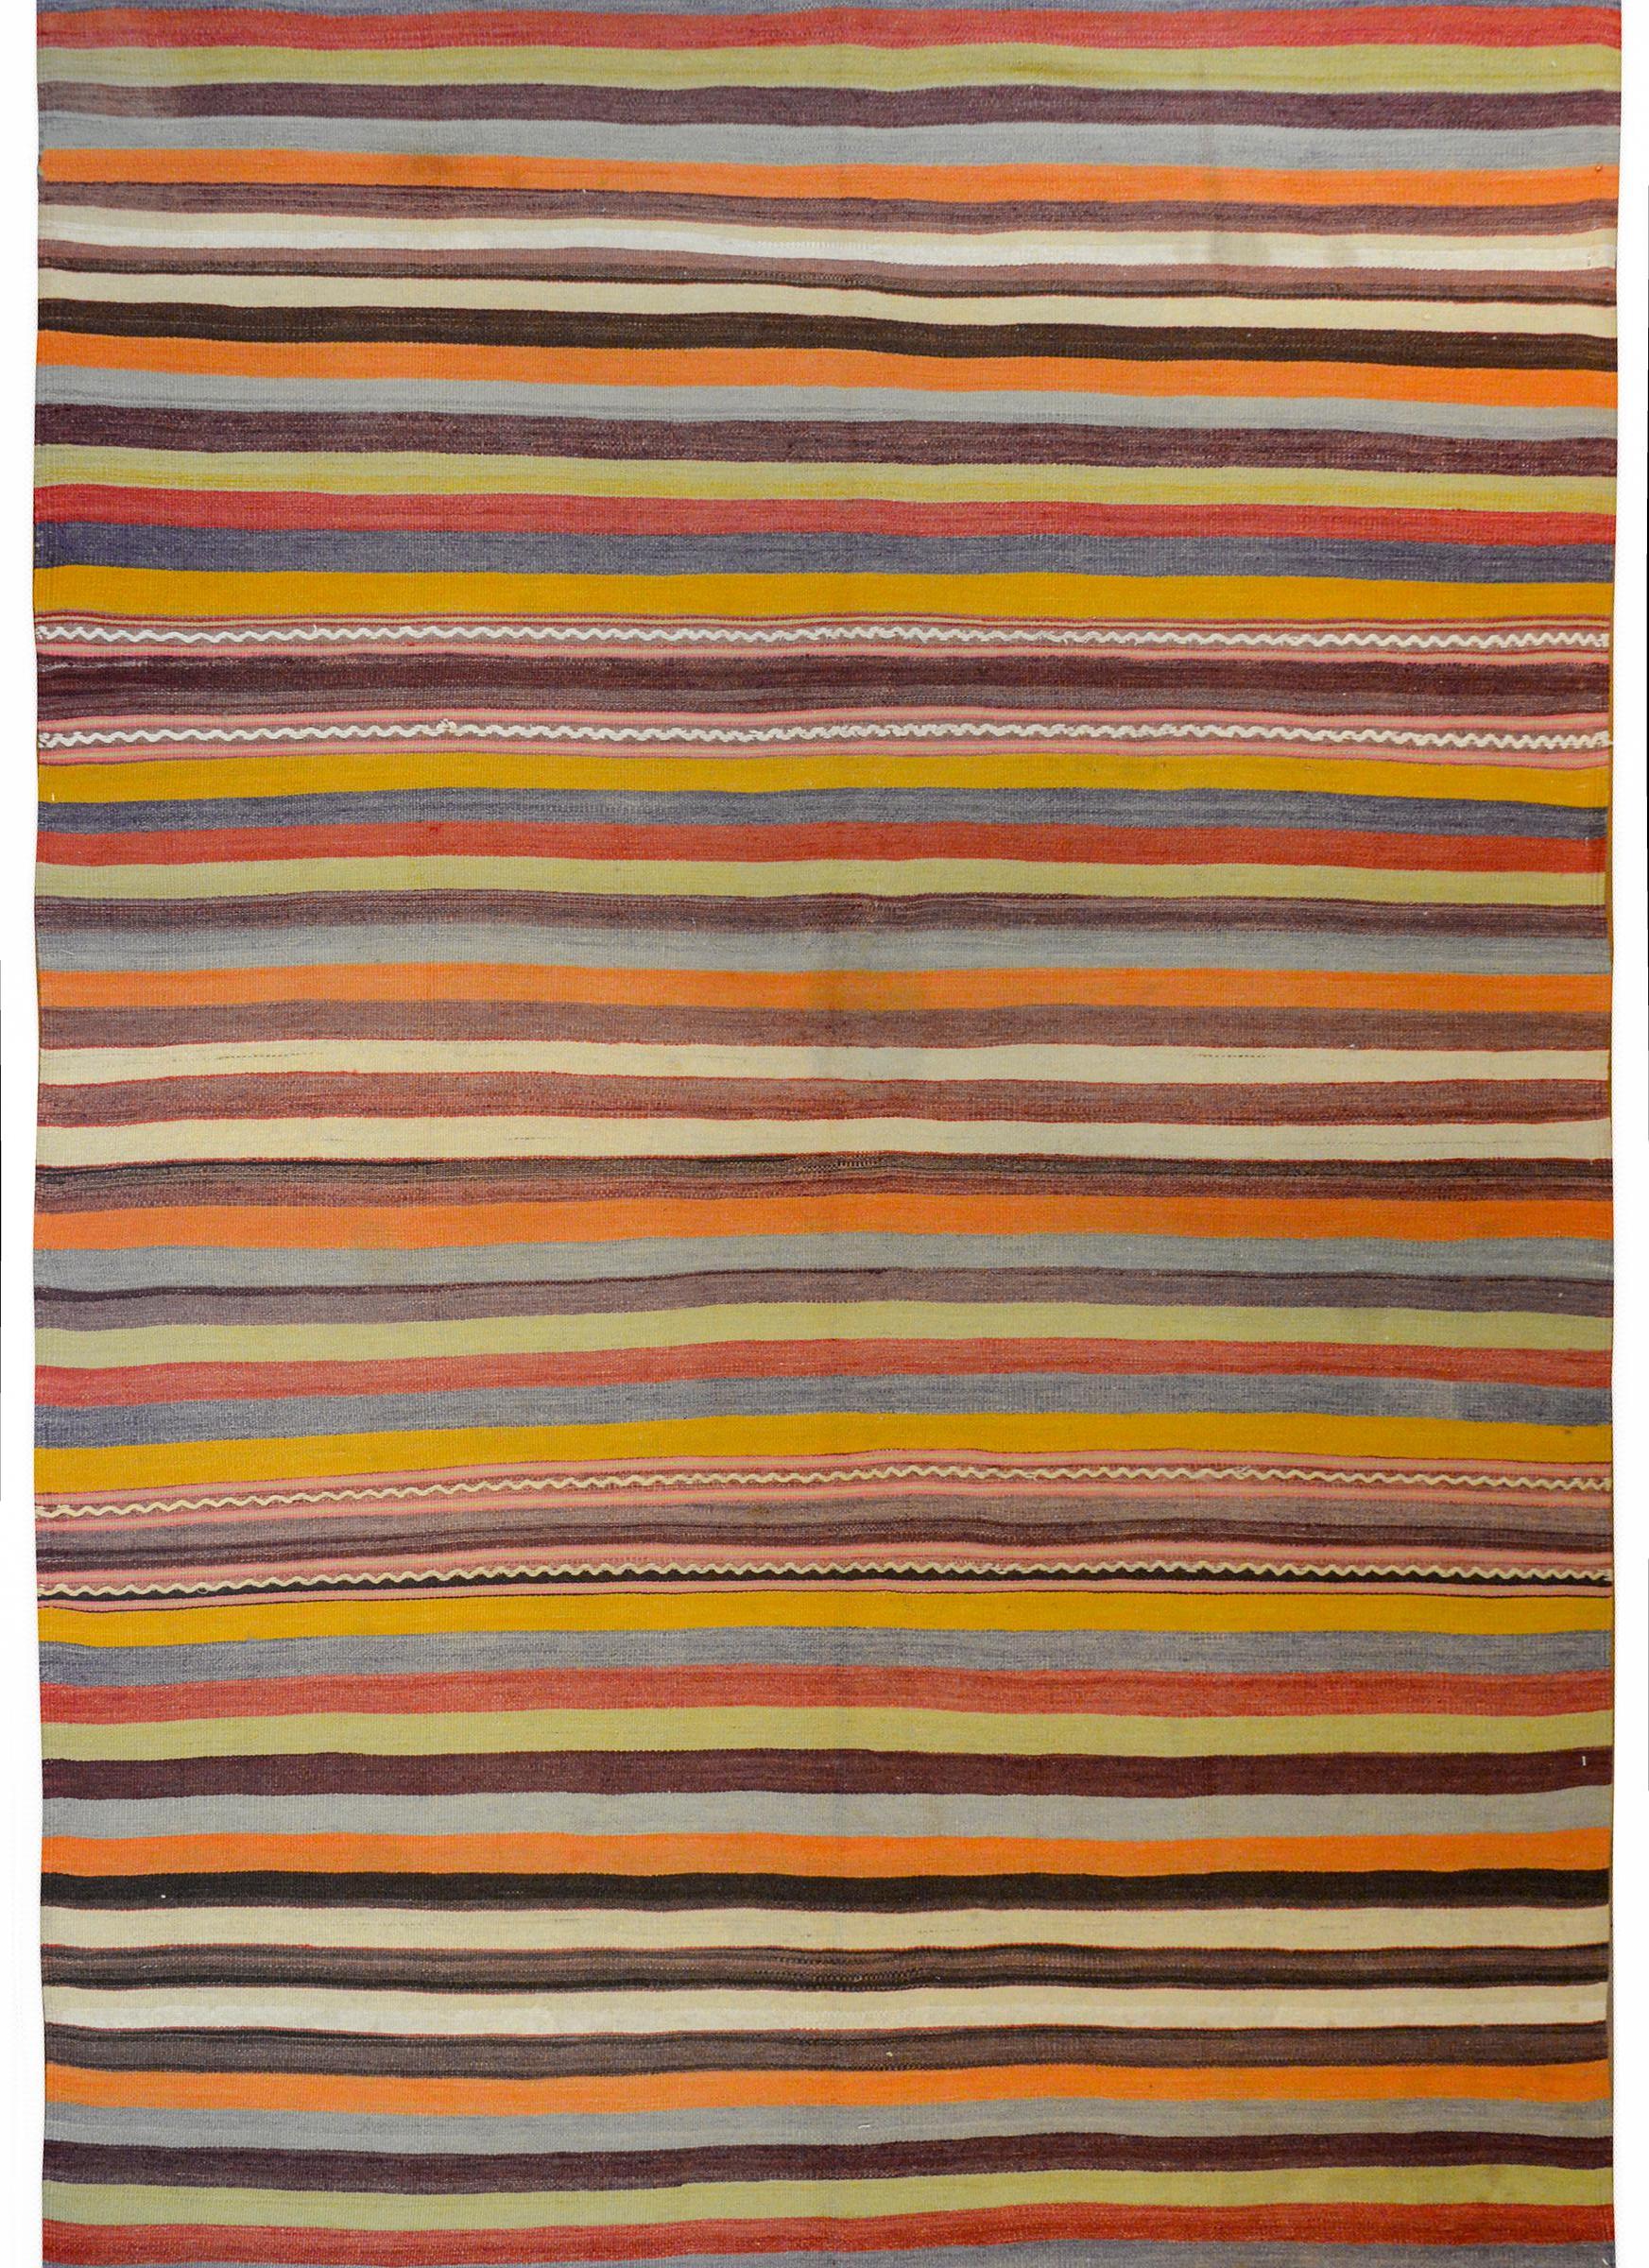 A fantastic mid-20th century Turkish Kilim rug with a beautiful multicolored stripe pattern containing orange, gold, green, indigo, cream, and black vegetable dyed wool.